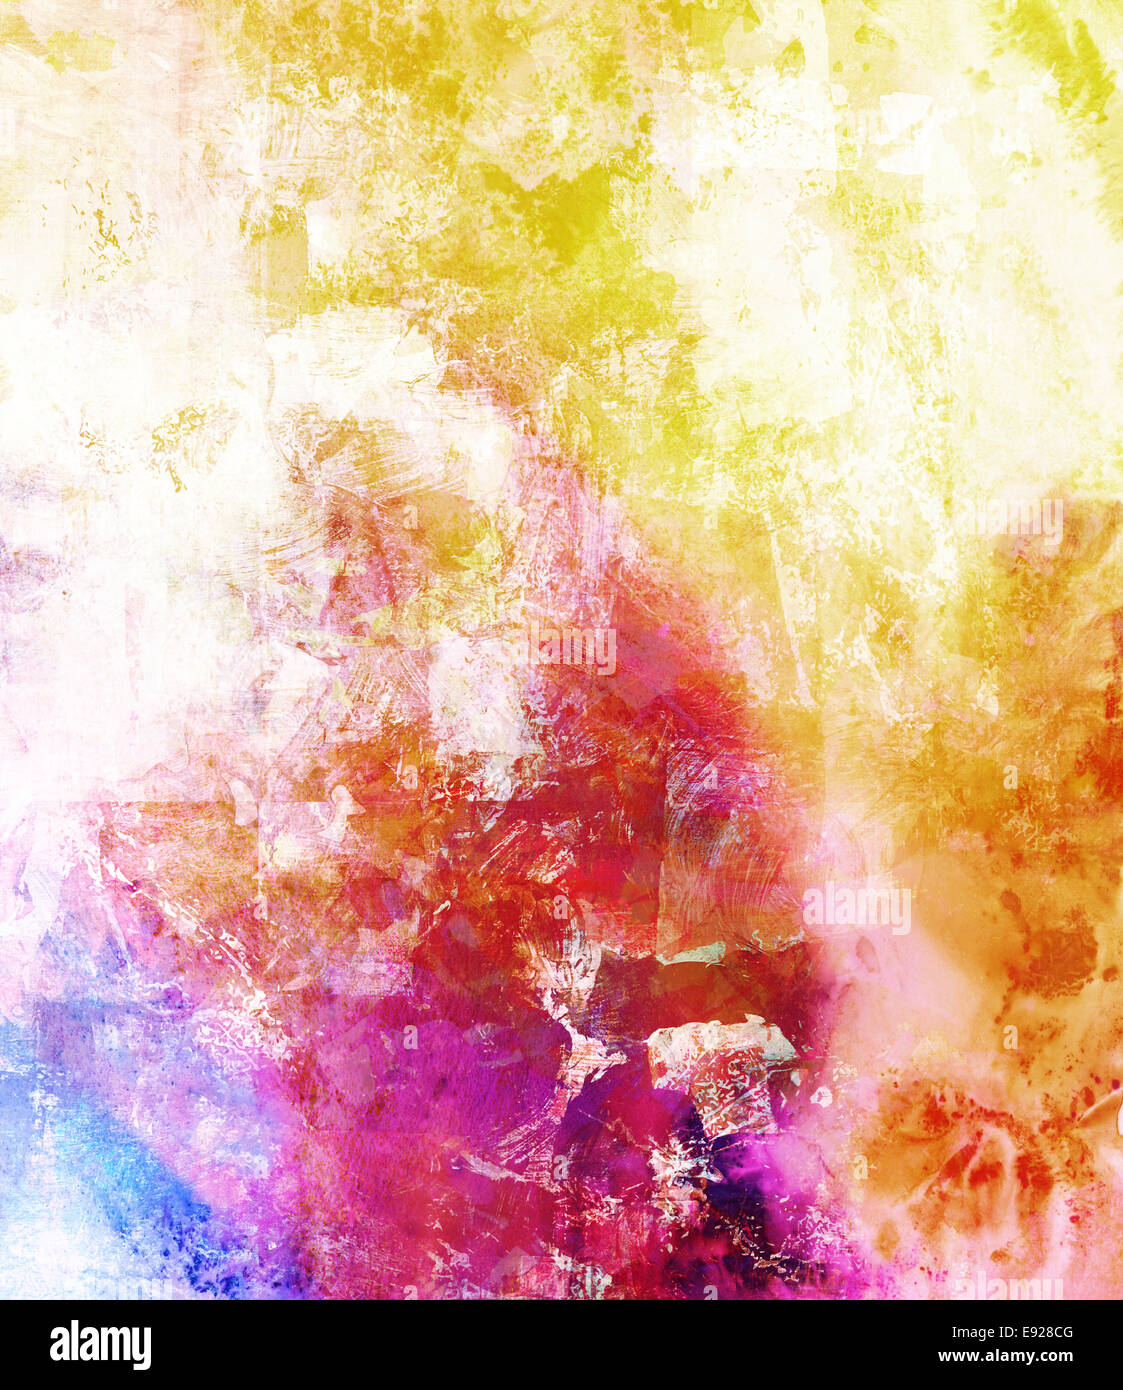 abstract painting Stock Photo